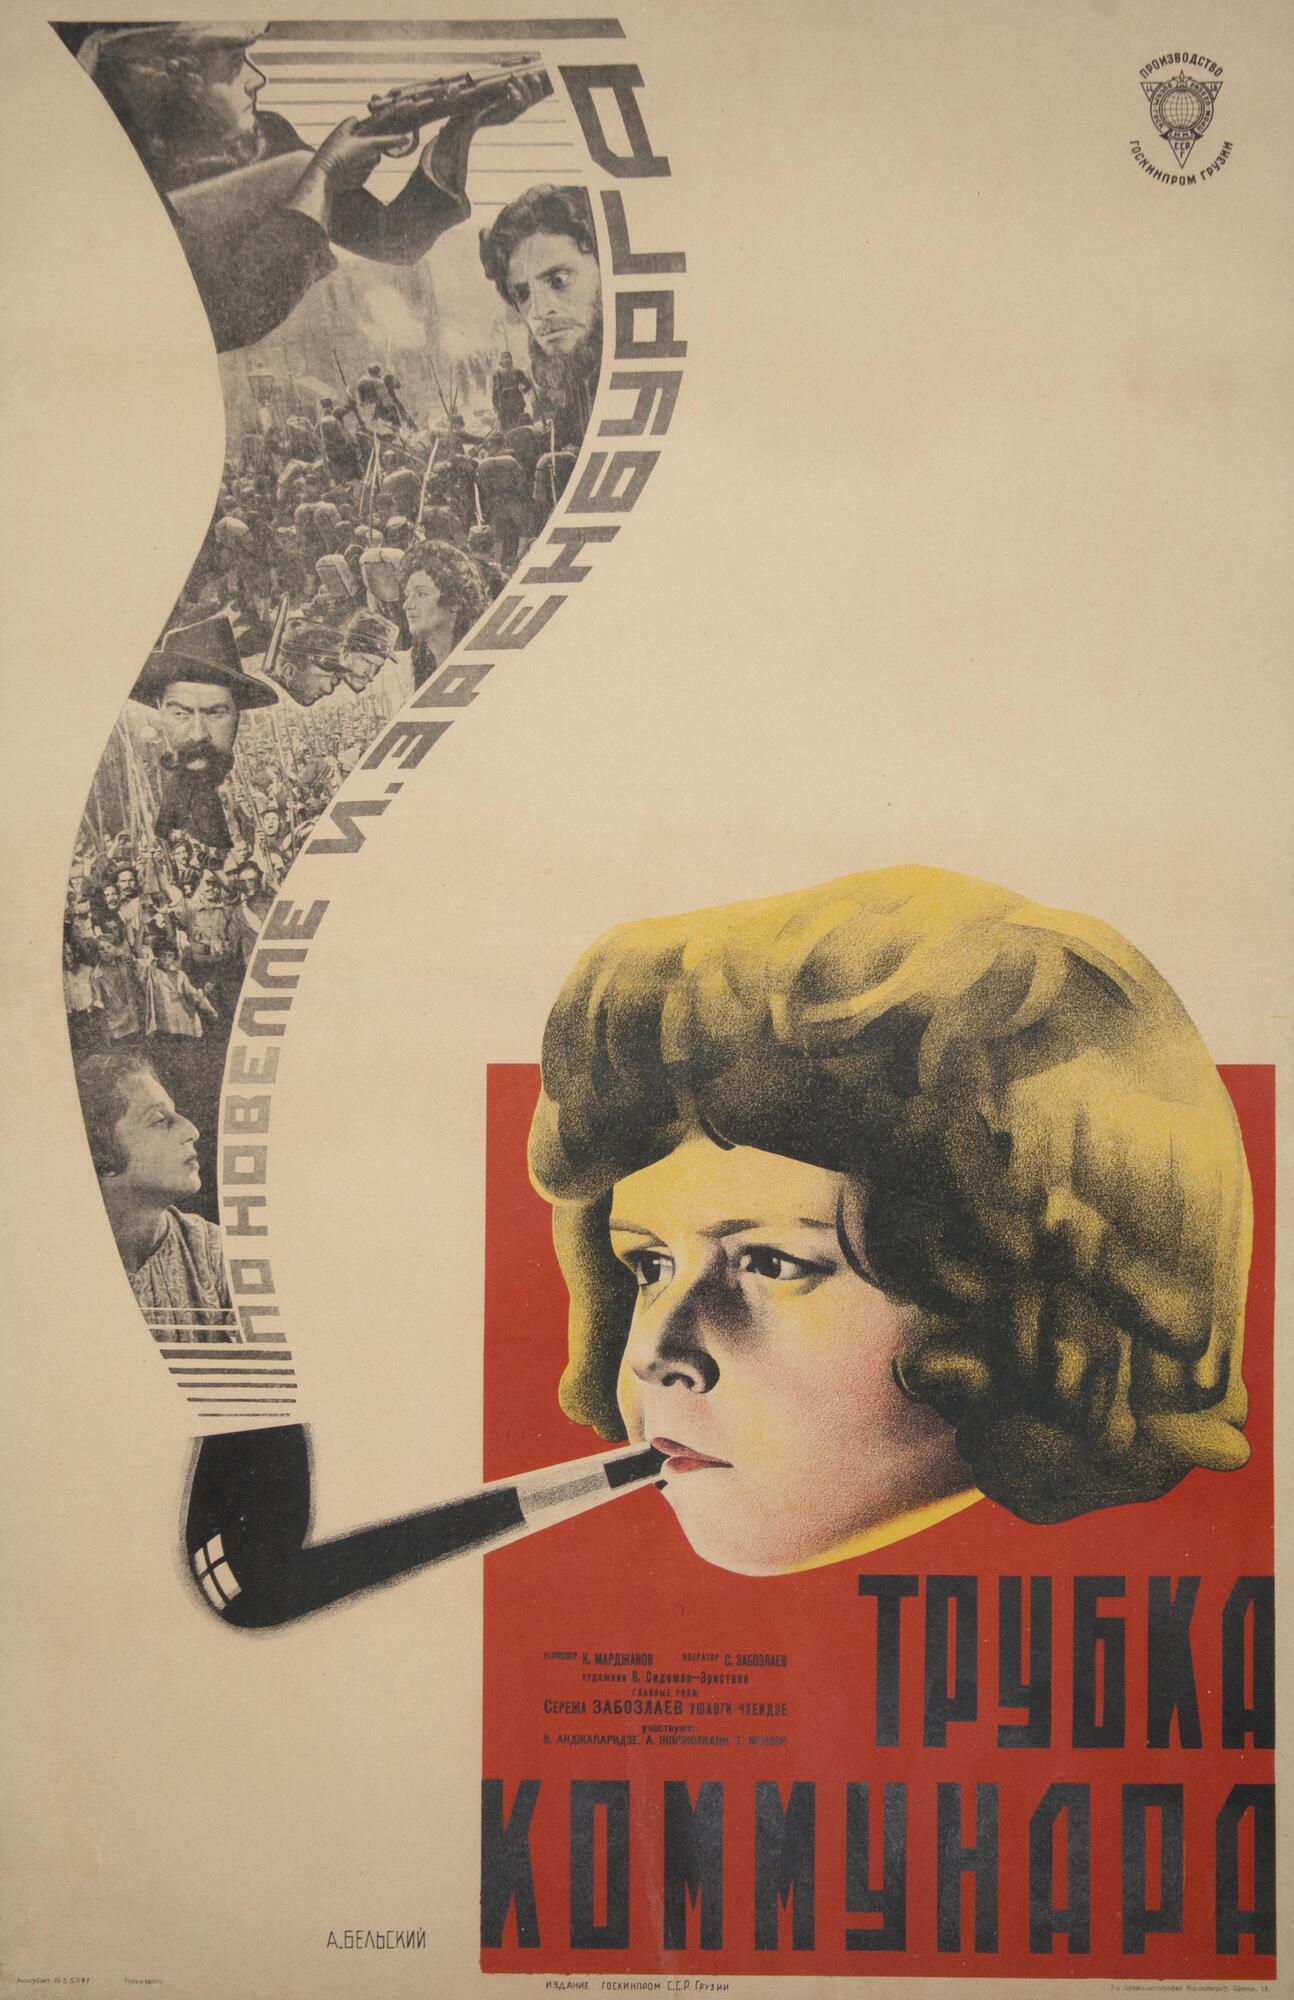 Overall white, red, black and yellow. Woman with blond hair, smoking a pipe. There are words and images coming out of the pipe like smoke.